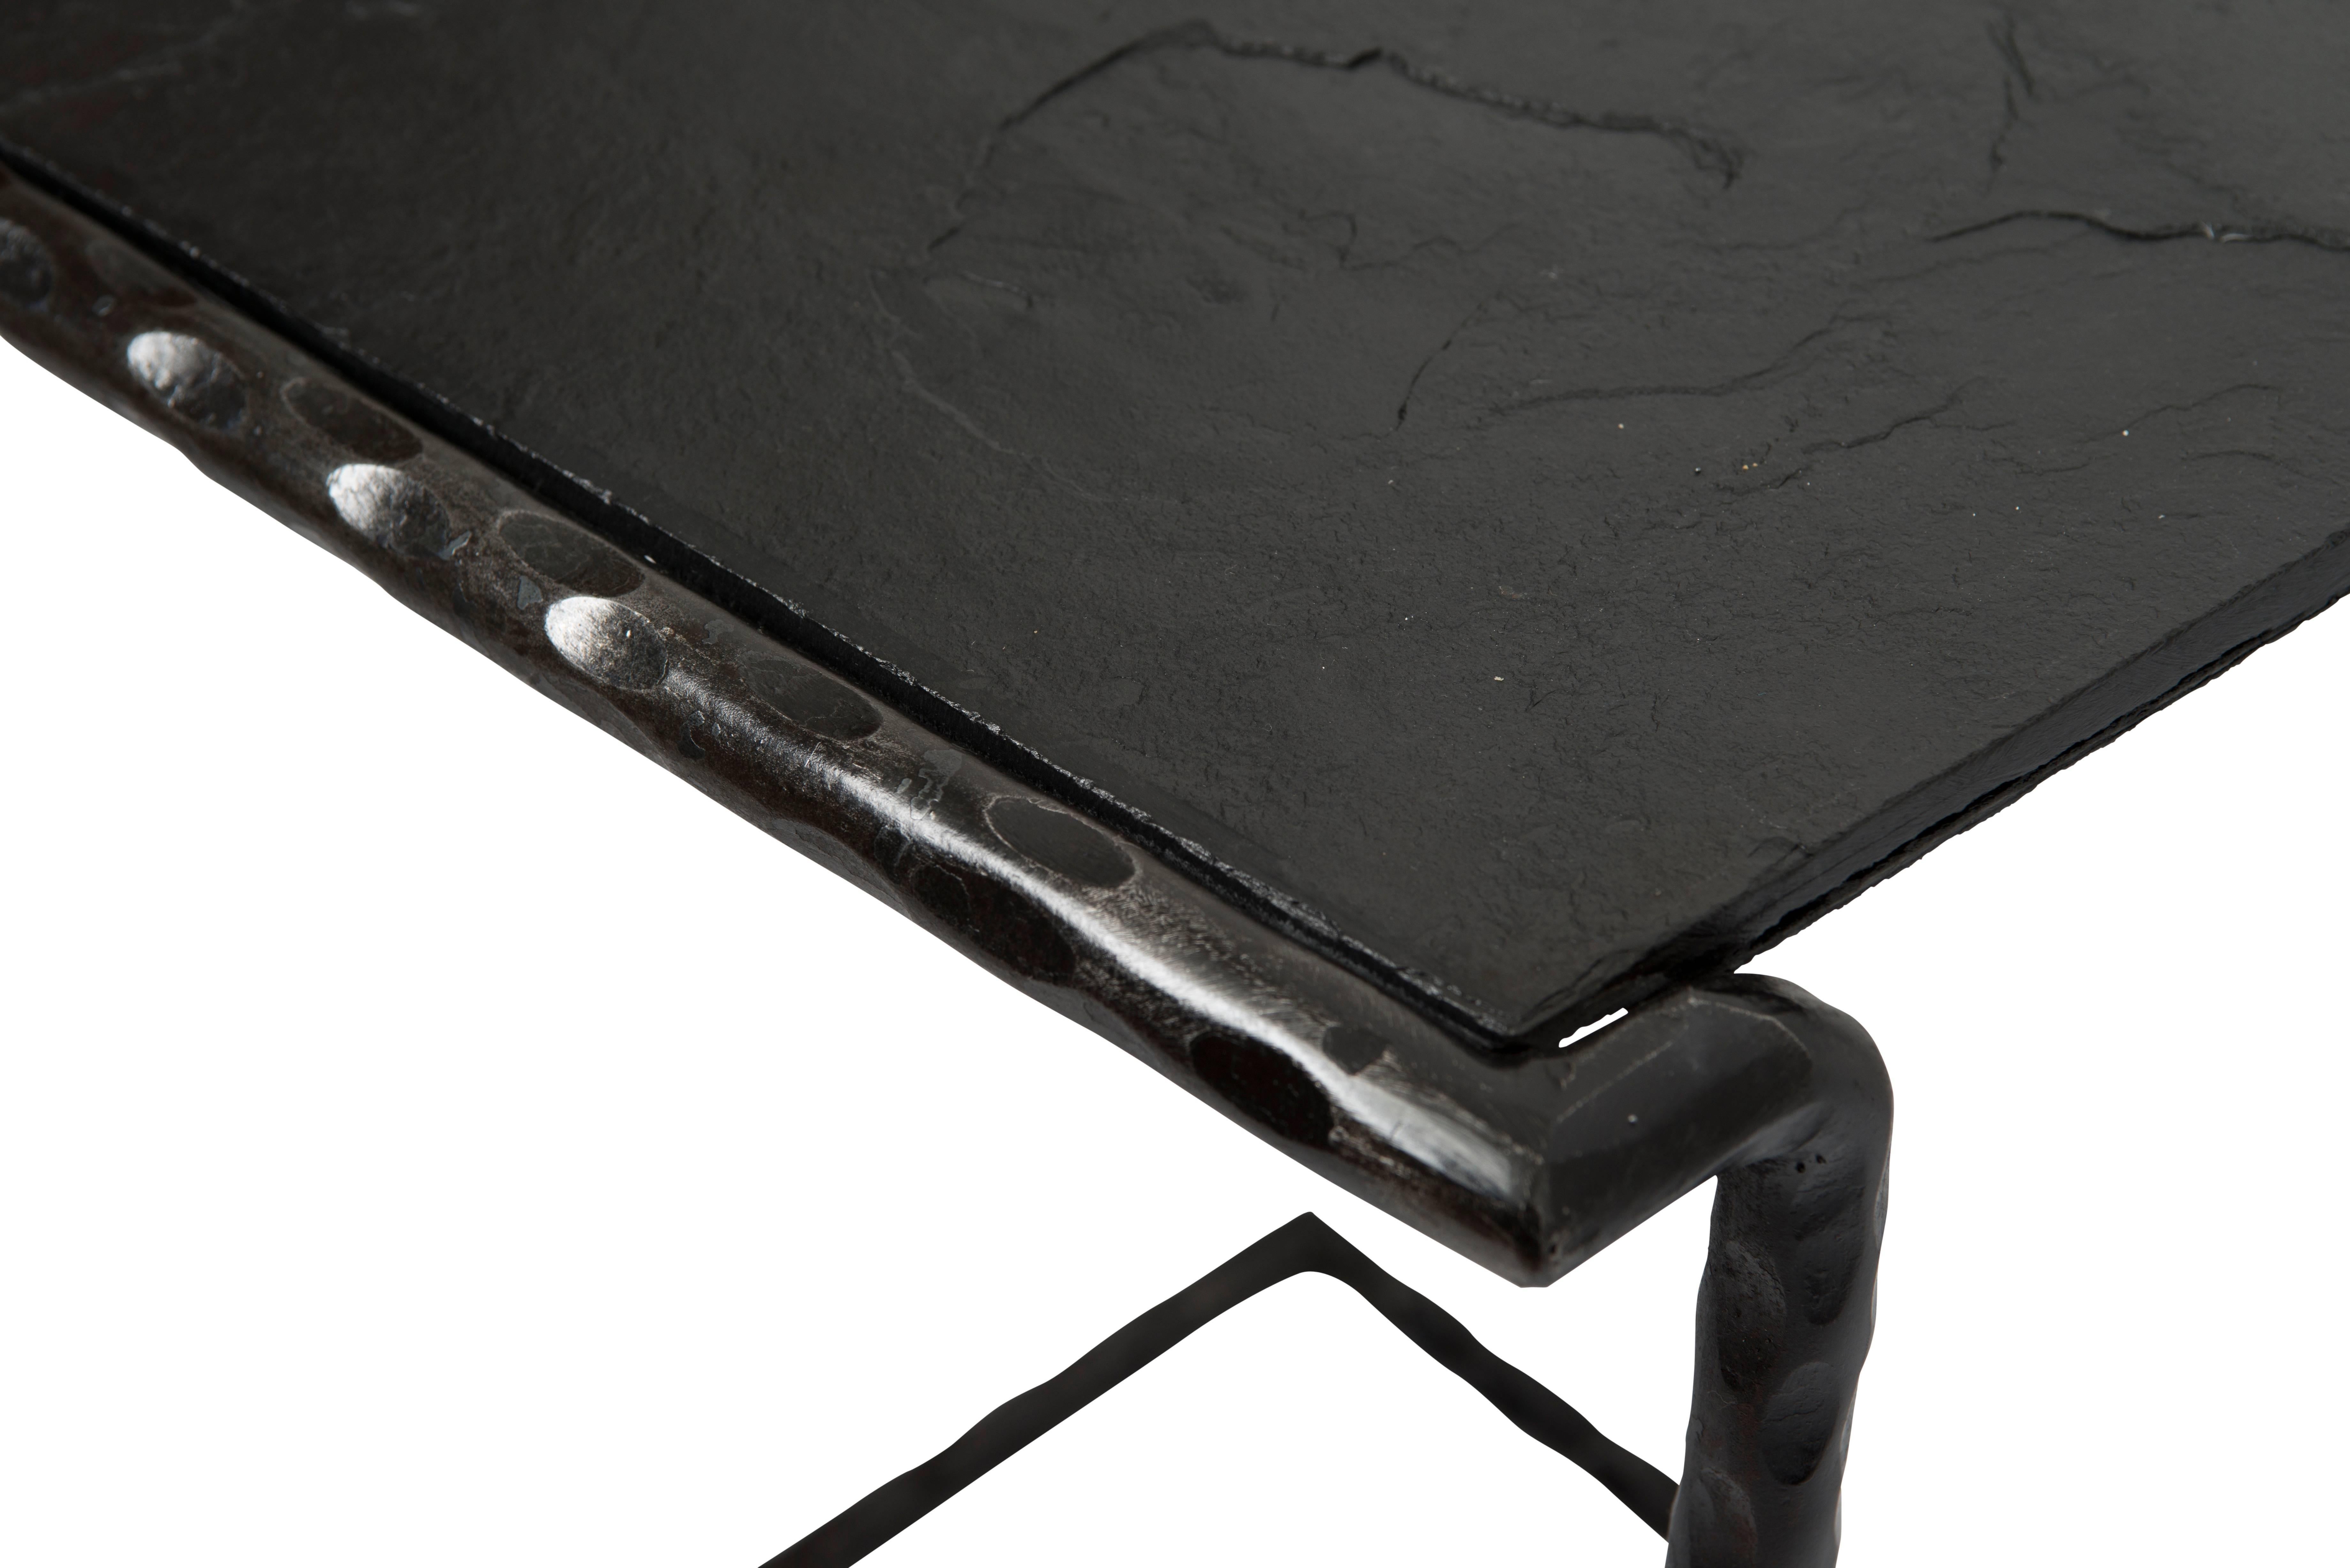 Steel frame with a slate top. The black slate has an uneven top surface. All slate is hand cut. A fun element to the design is that none of the cut lines of the table surface are parallel to each other. The footprint of the table will mimic the